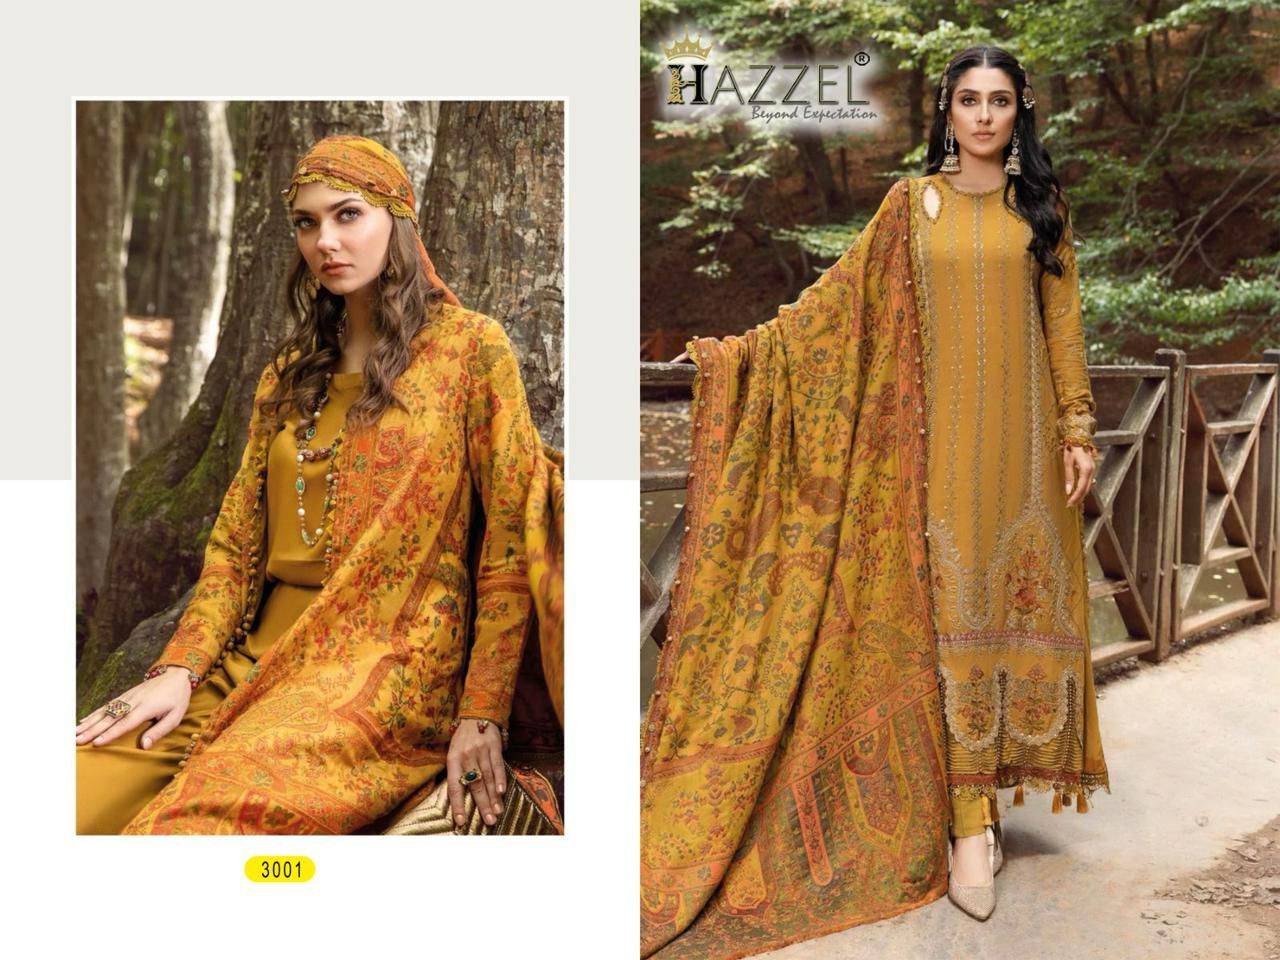 Maria.B Embroidered-24 By Hazzel 3001 To 3004 Series Beautiful Pakistani Suits Stylish Colorful Fancy Casual Wear & Ethnic Wear Rayon Cotton Embroidered Dresses At Wholesale Price